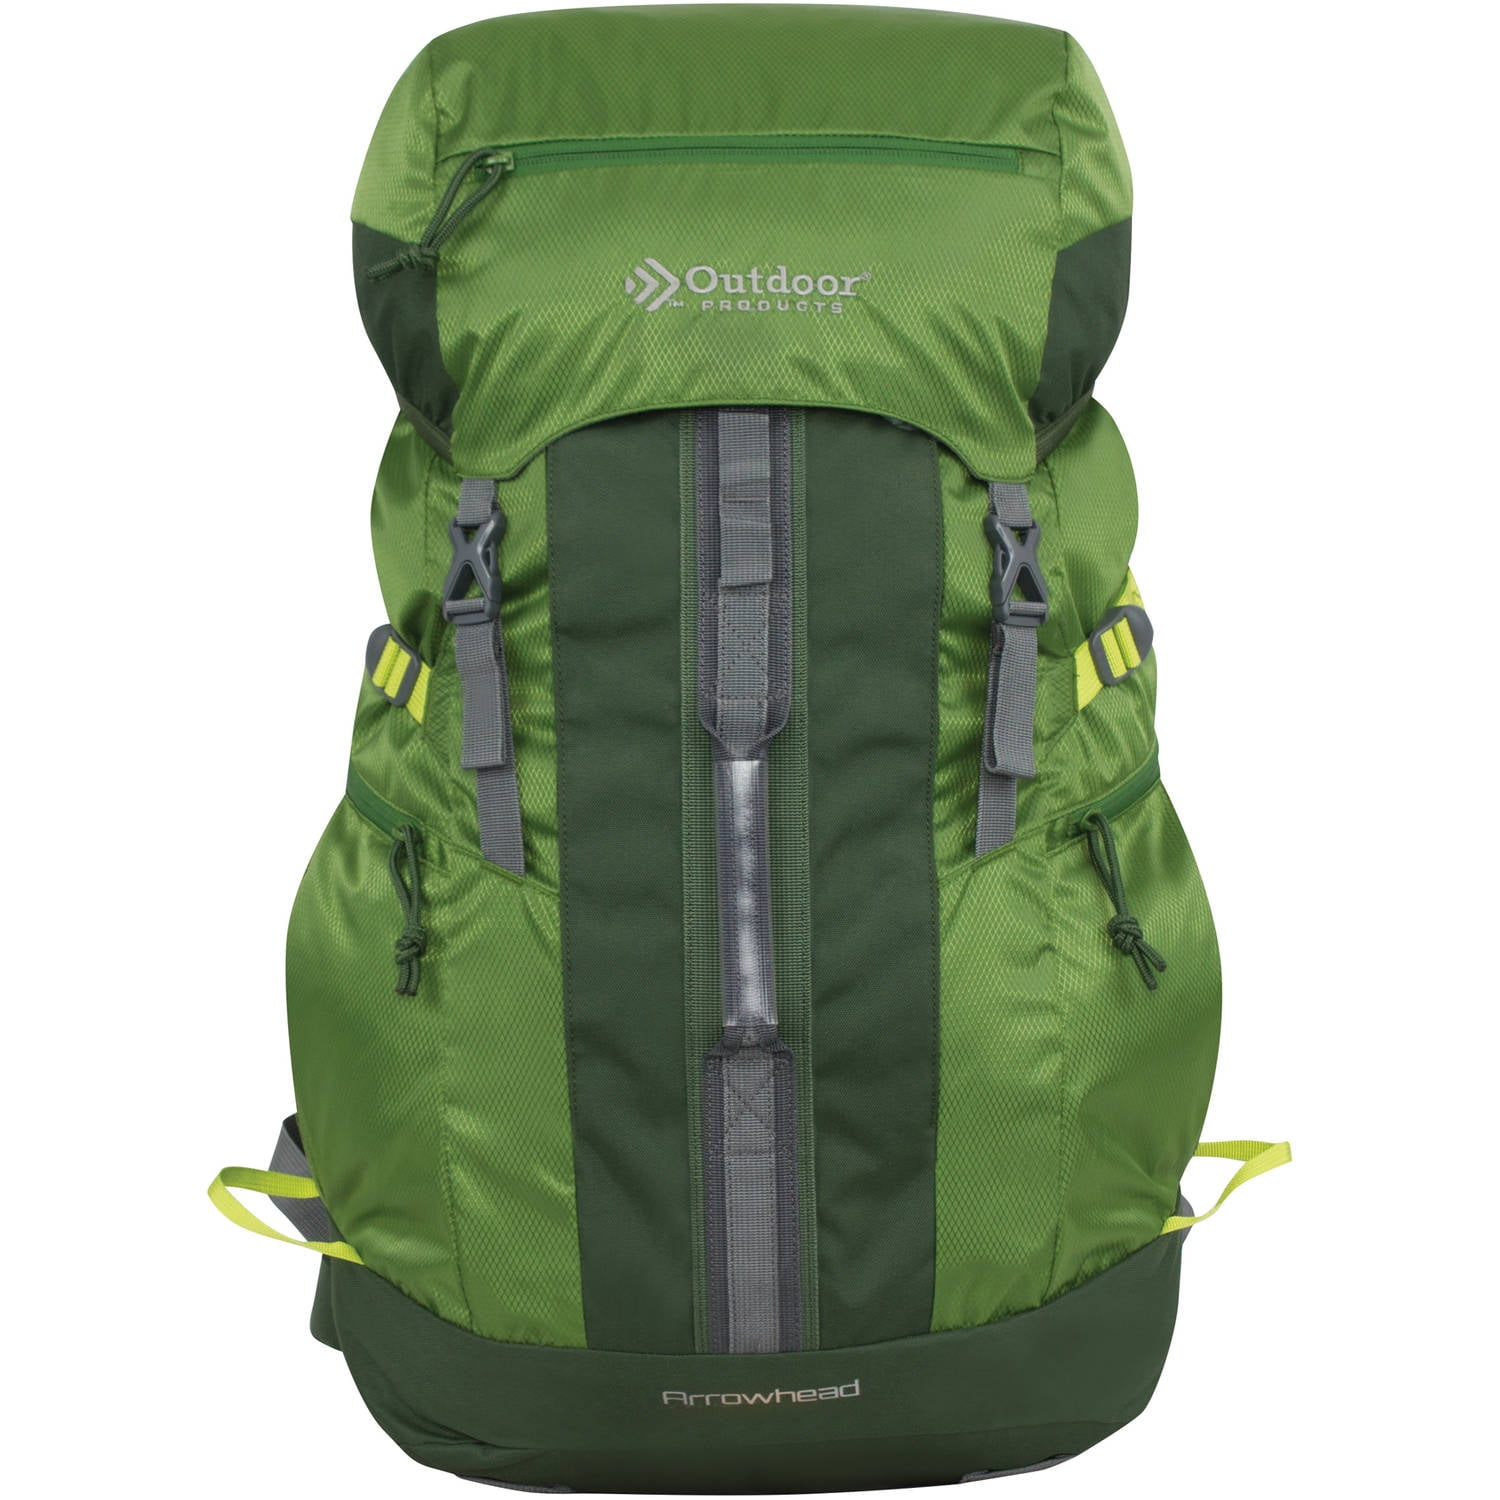 Details about   Gray Outdoor Products Arrowhead Backpack